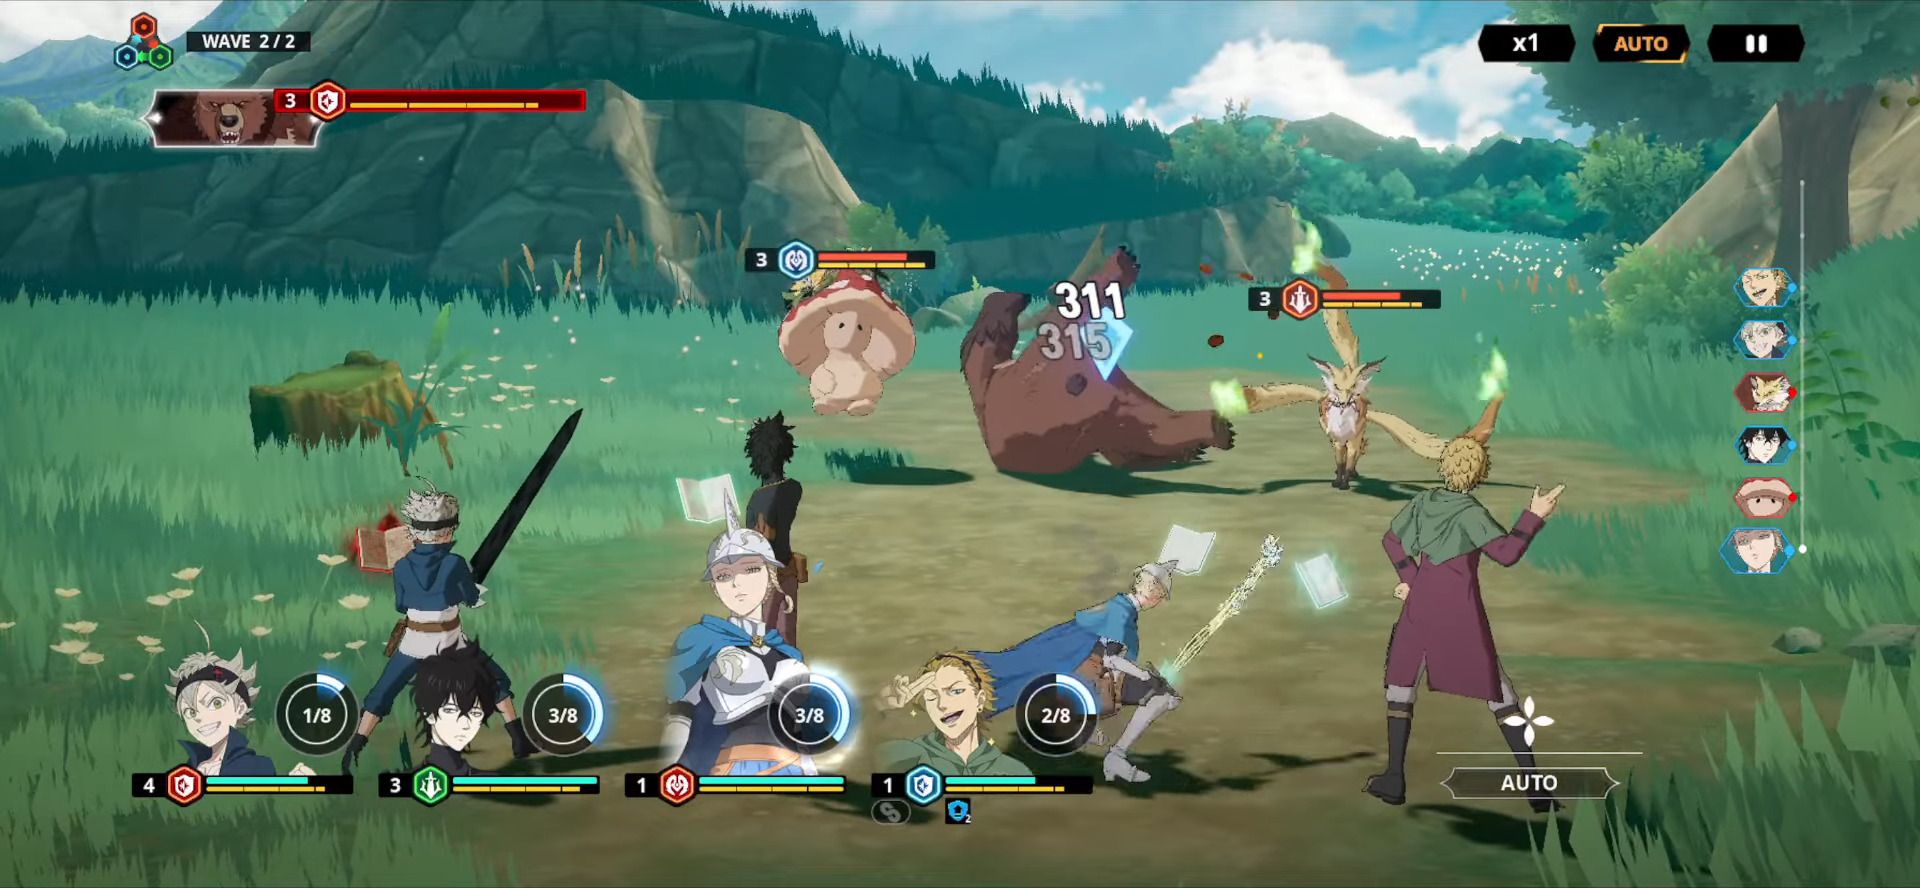 Gameplay of the Black Clover M for Android phone or tablet.